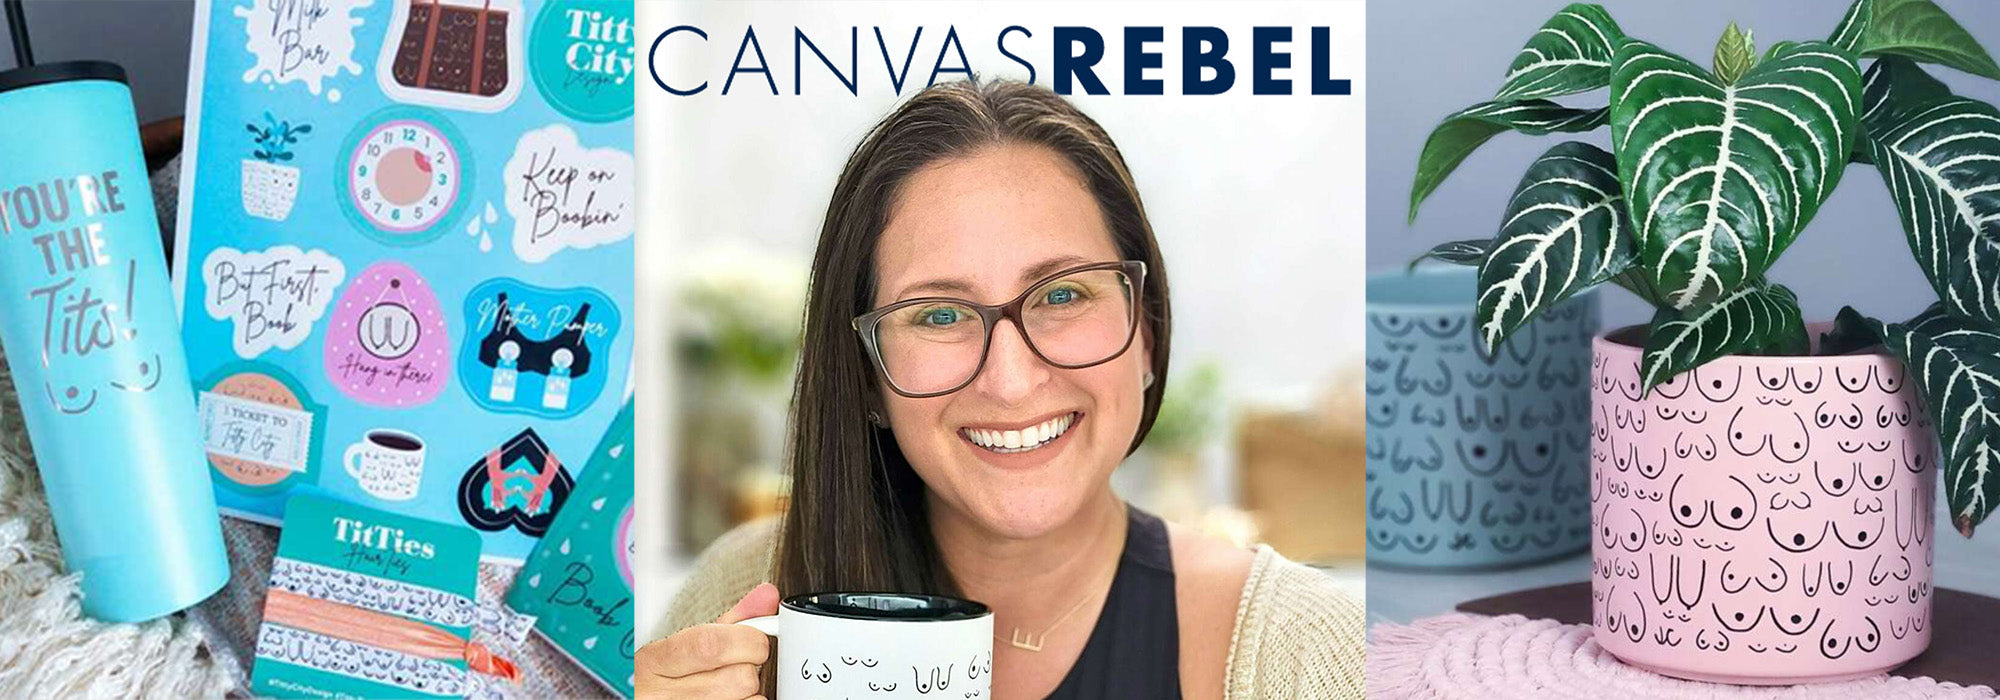 Canvas Rebel Interviews Jessy, founder of Titty City Design